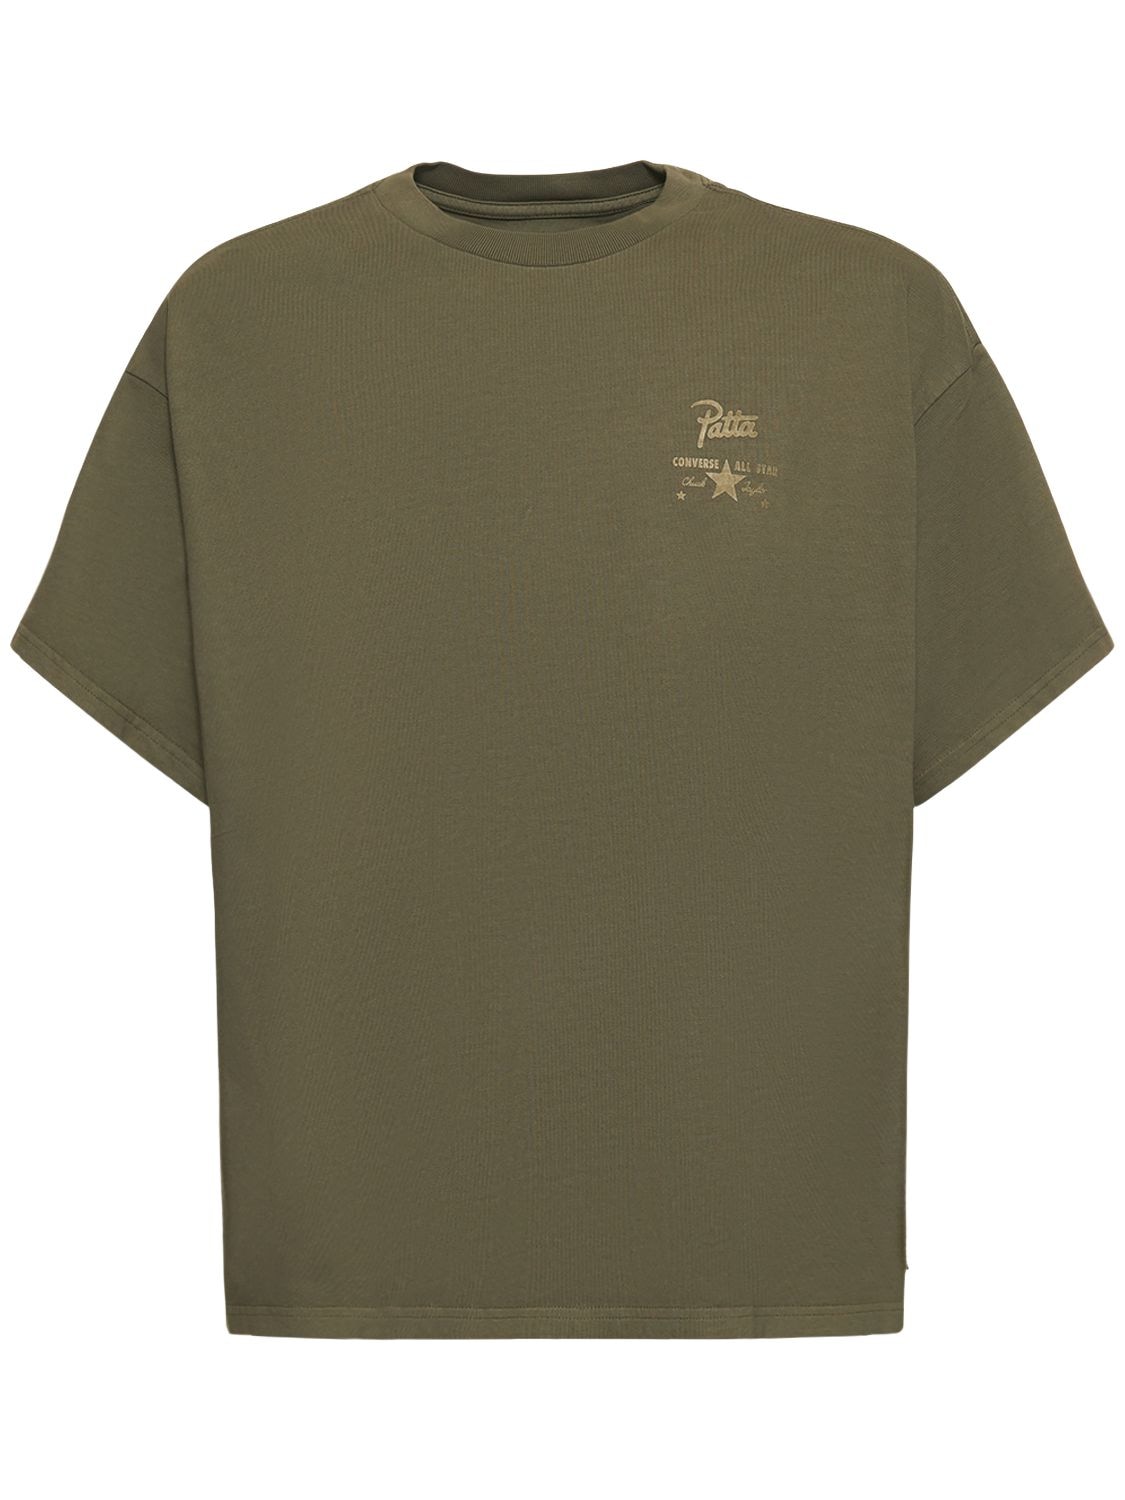 Converse Patta Printed Jersey T-shirt In Olive